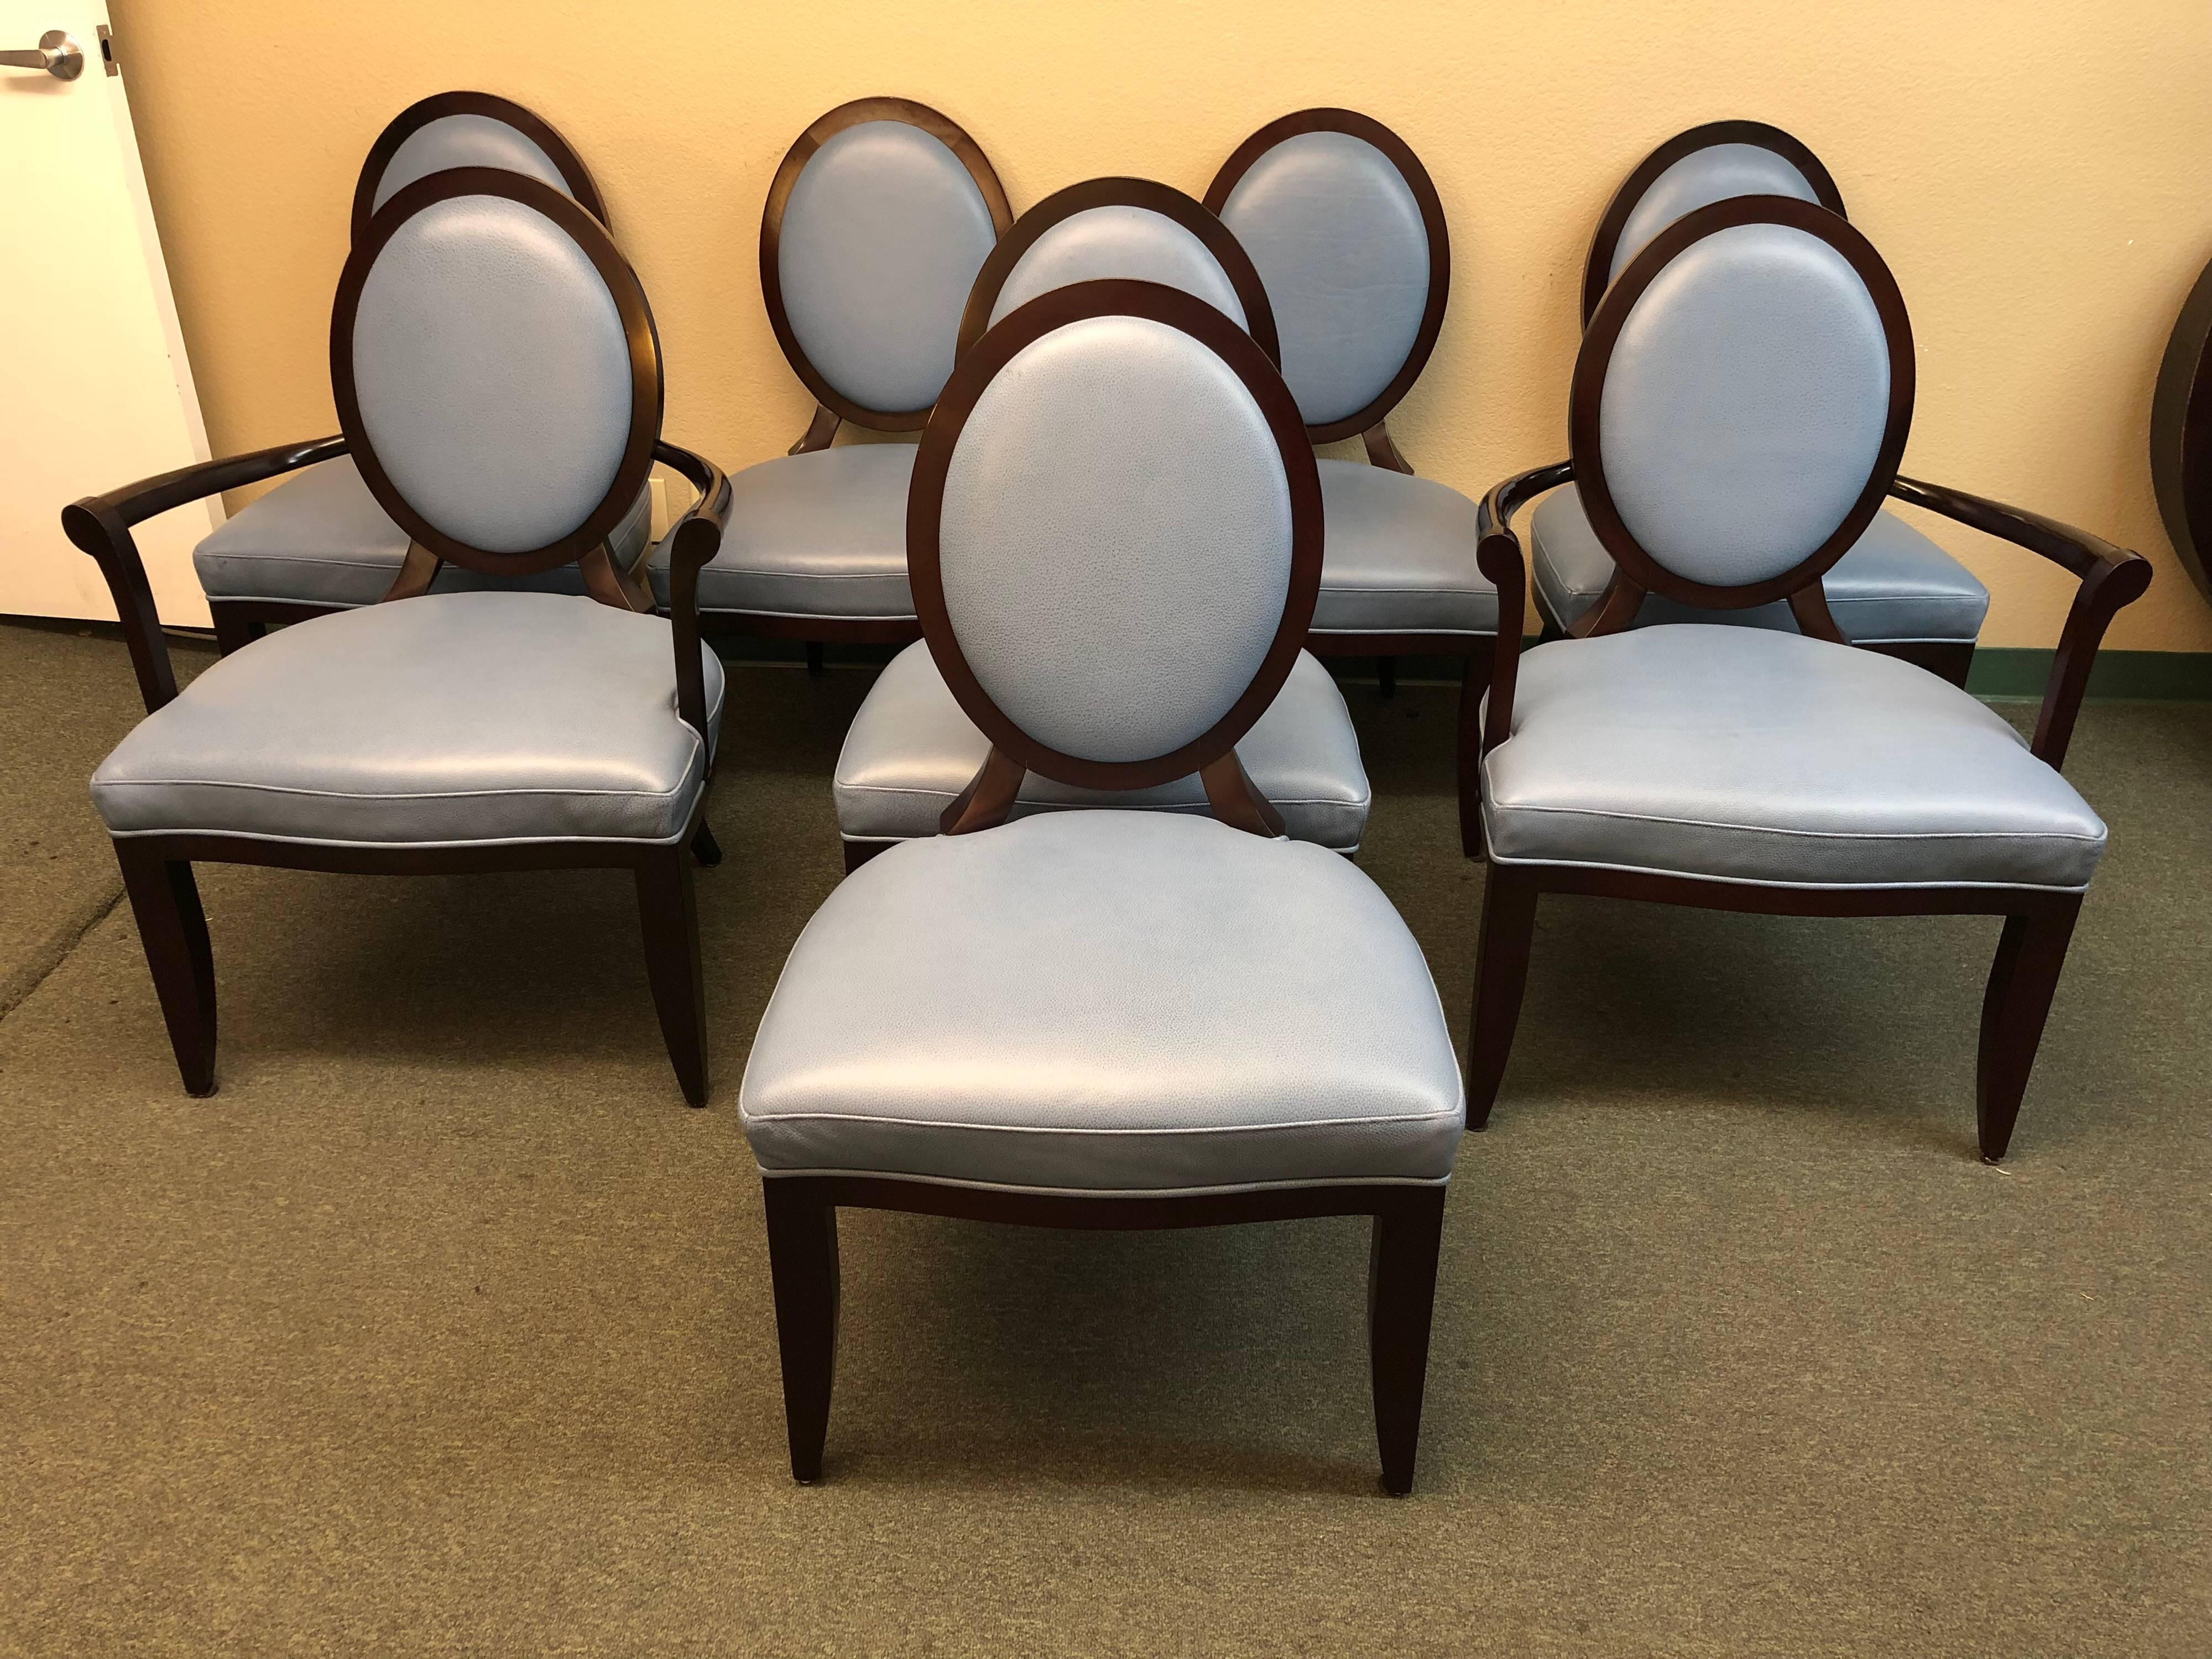 A set of eight dining chairs. Bearing the signature Barbara Barry X-back, the oval dining chair features a refined mahogany wood frame and inset back upholstered in a beautiful corn flower blue leather. There are two armchairs and six sides. Side